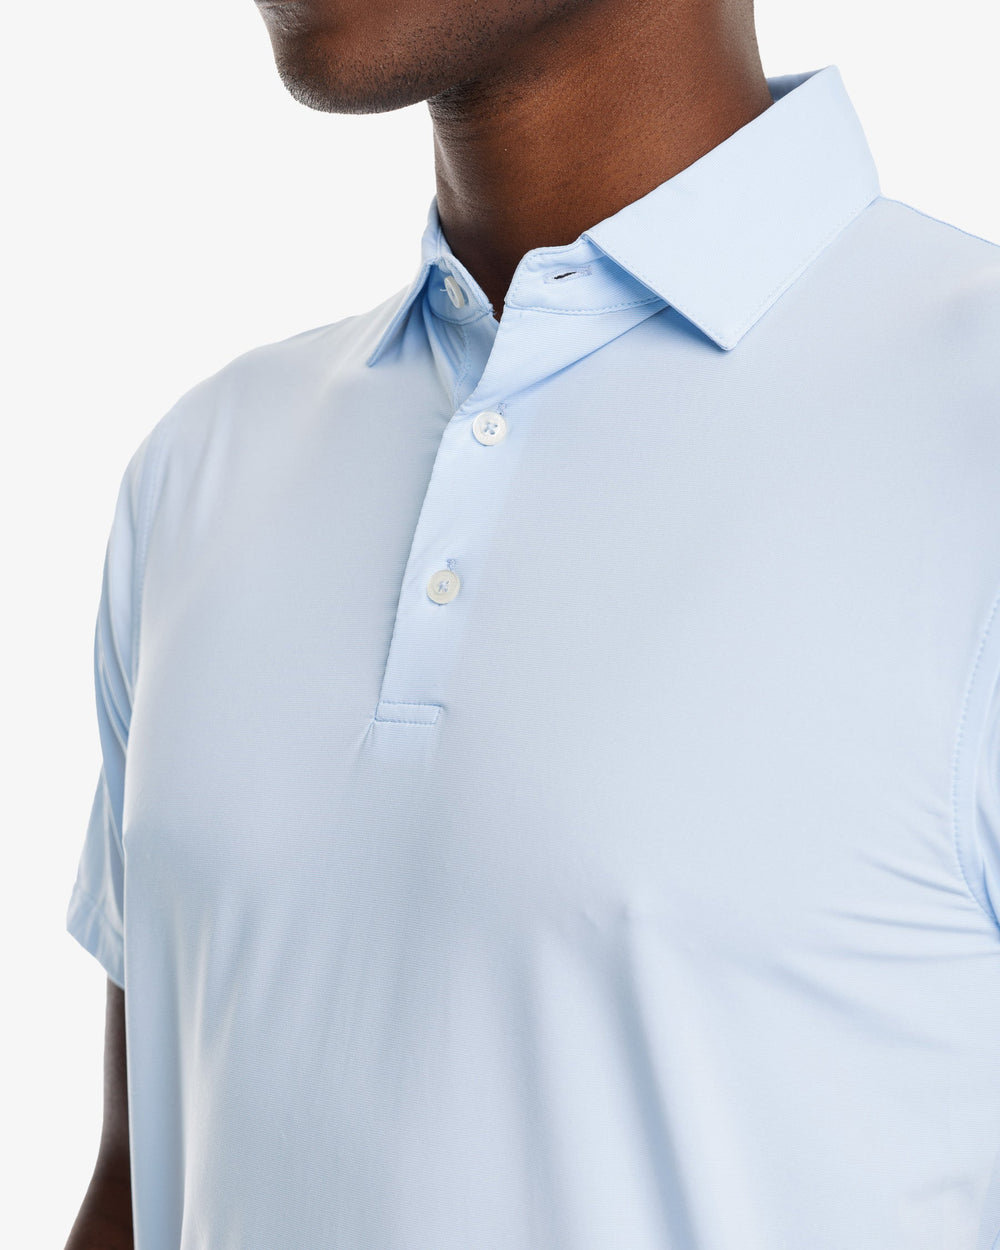 The model detail view of the Men's Sawgrass Stripe brrr°®-eeze Performance Polo Shirt by Southern Tide - Sky Blue